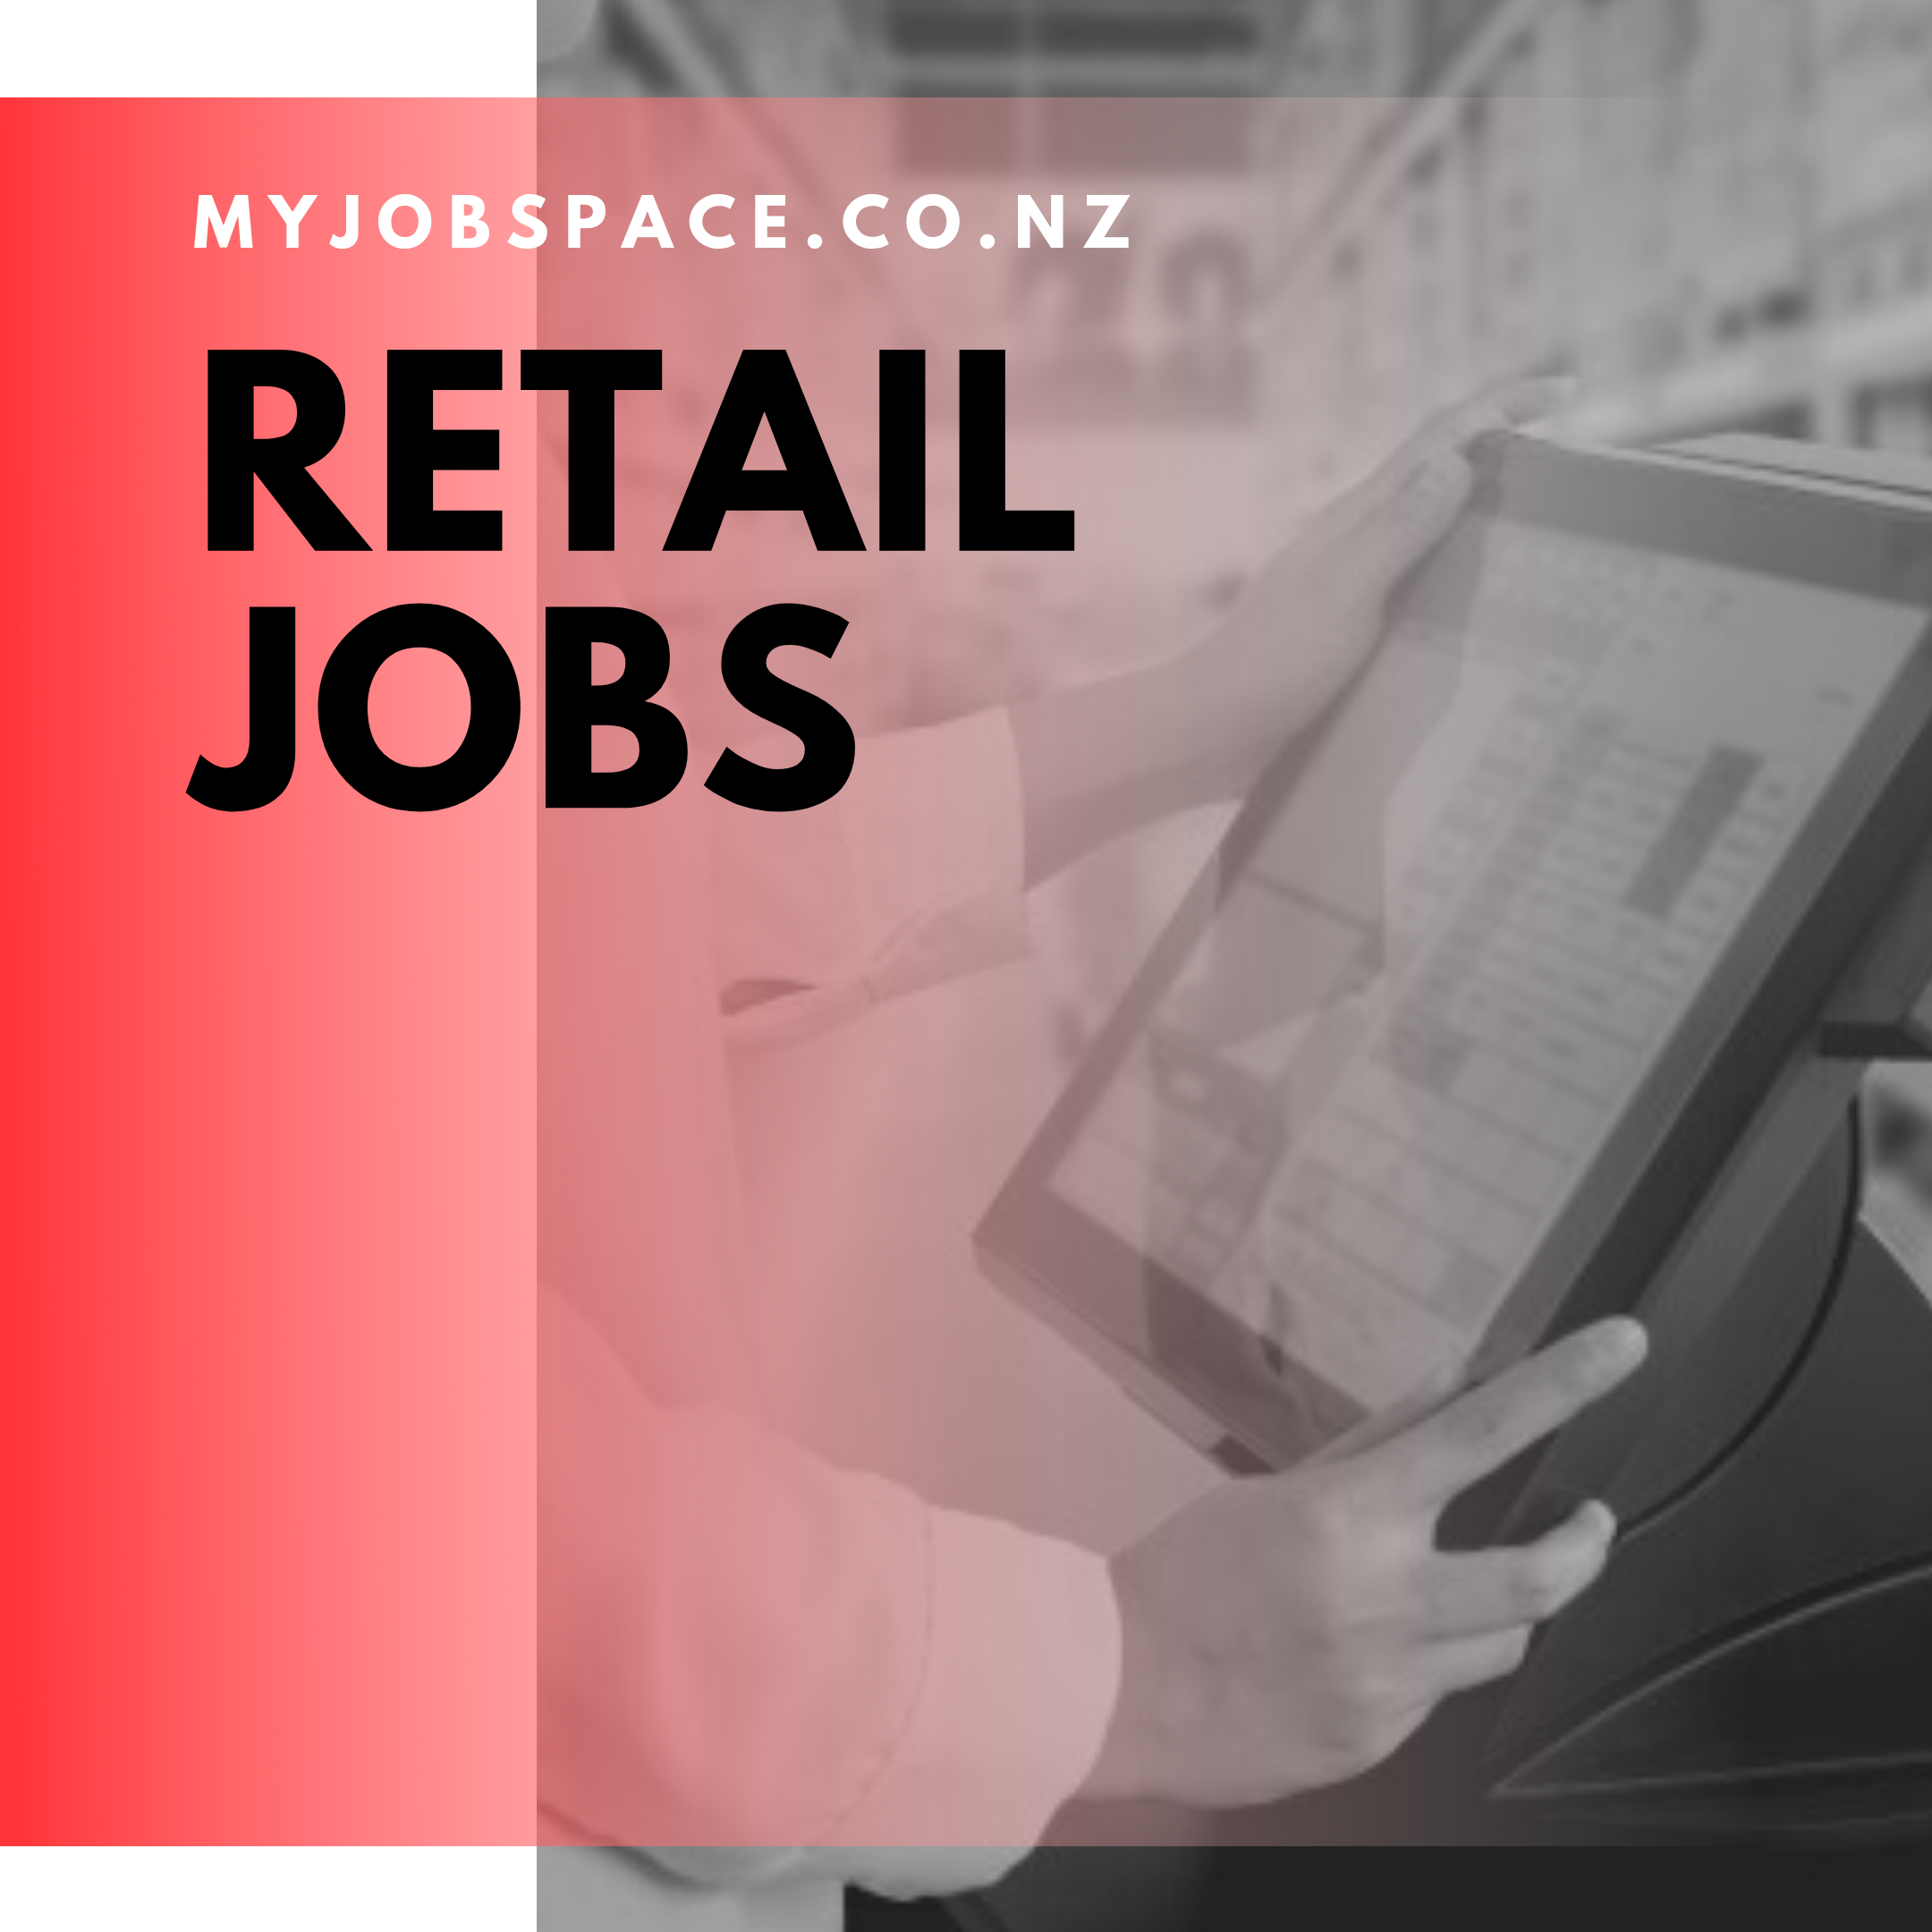 How to Get Best Options for Retail Jobs in New Zealand?